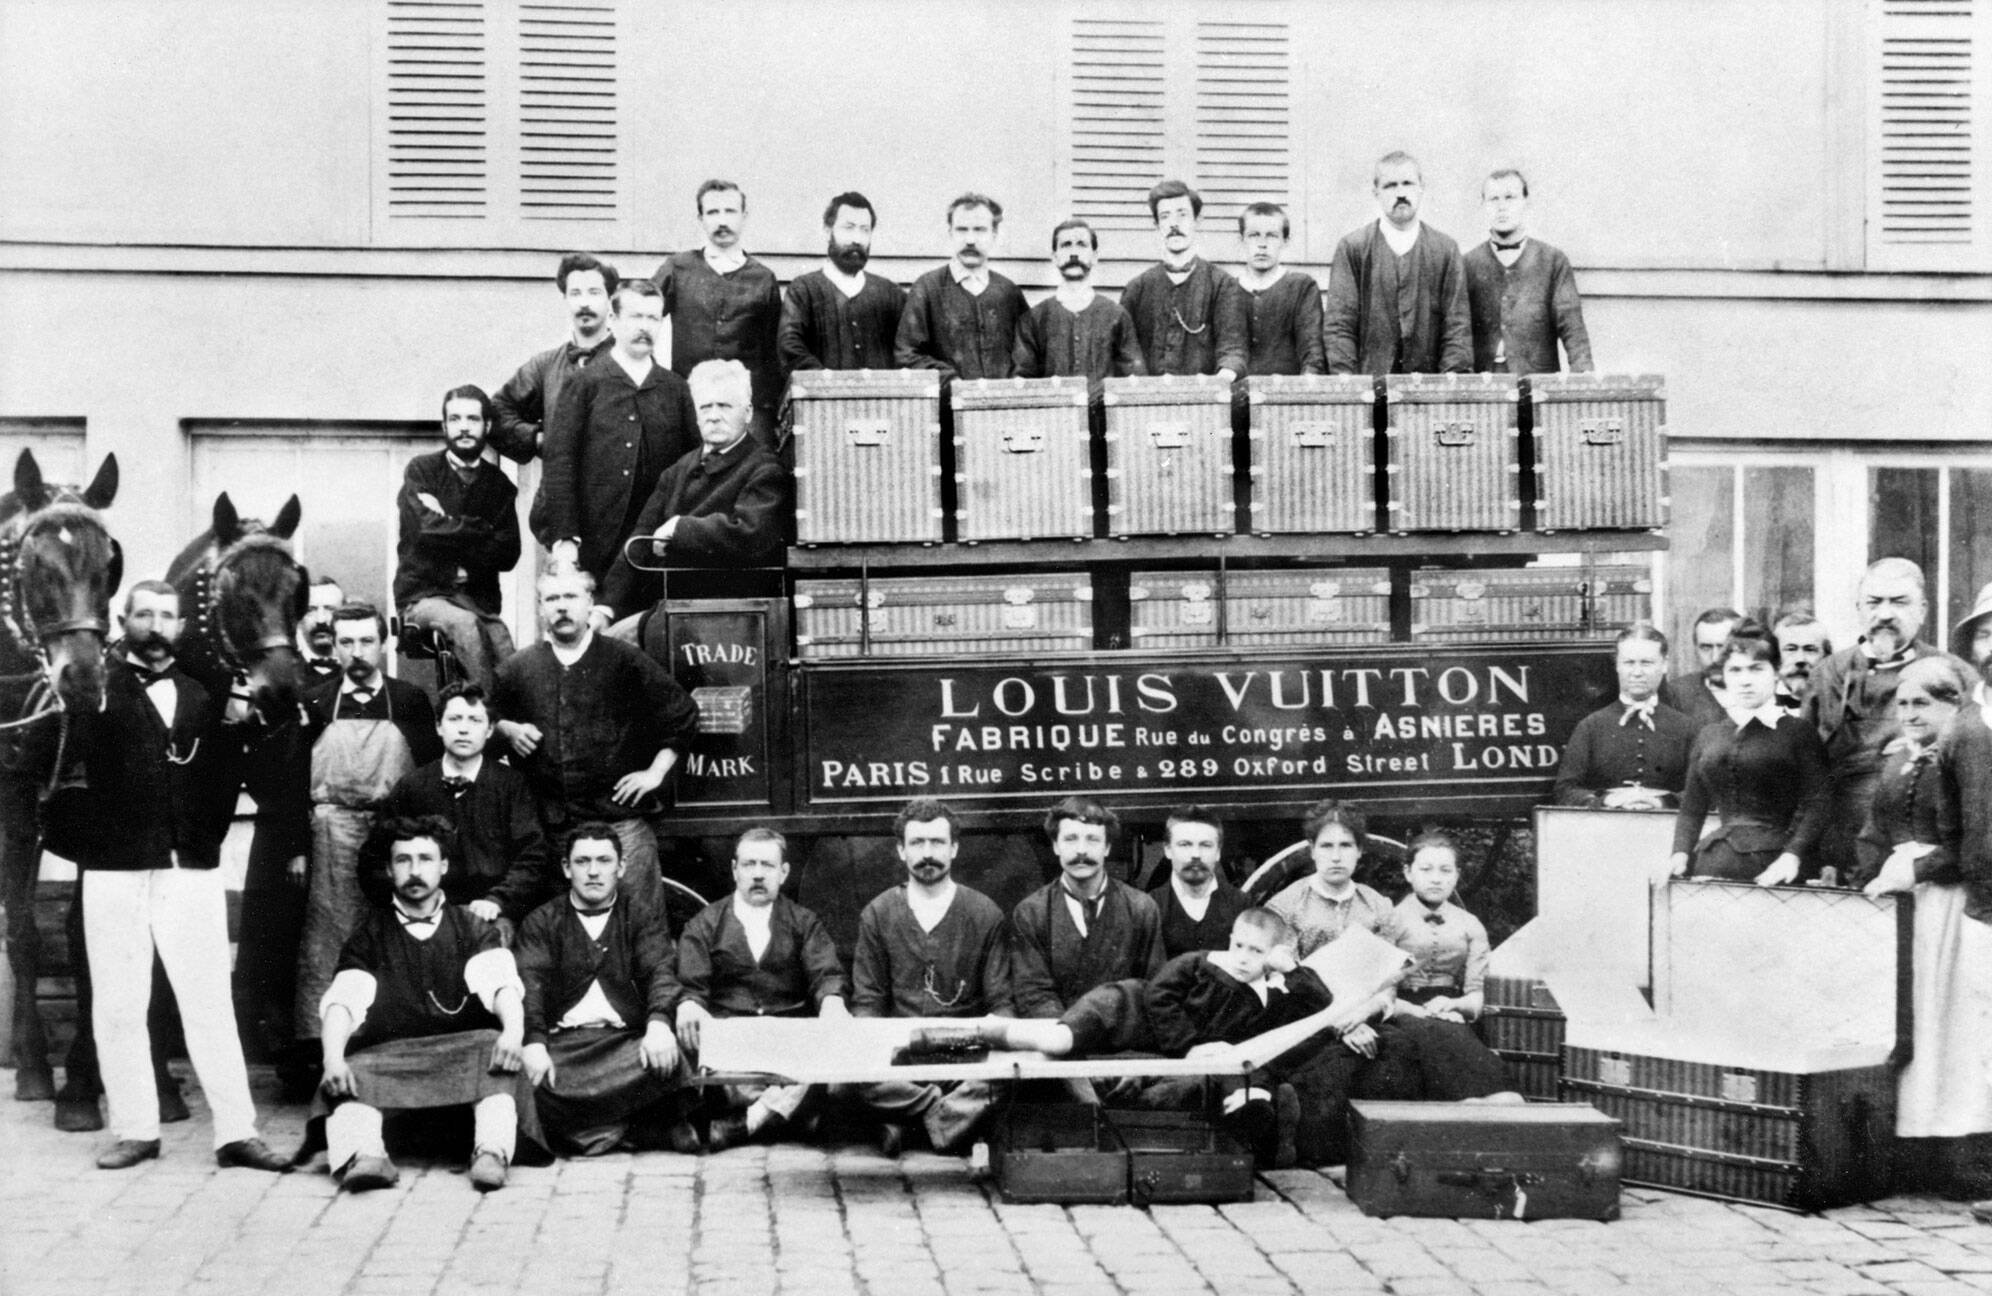 Louis Vuitton's trunk show celebrates 200 years of excellence